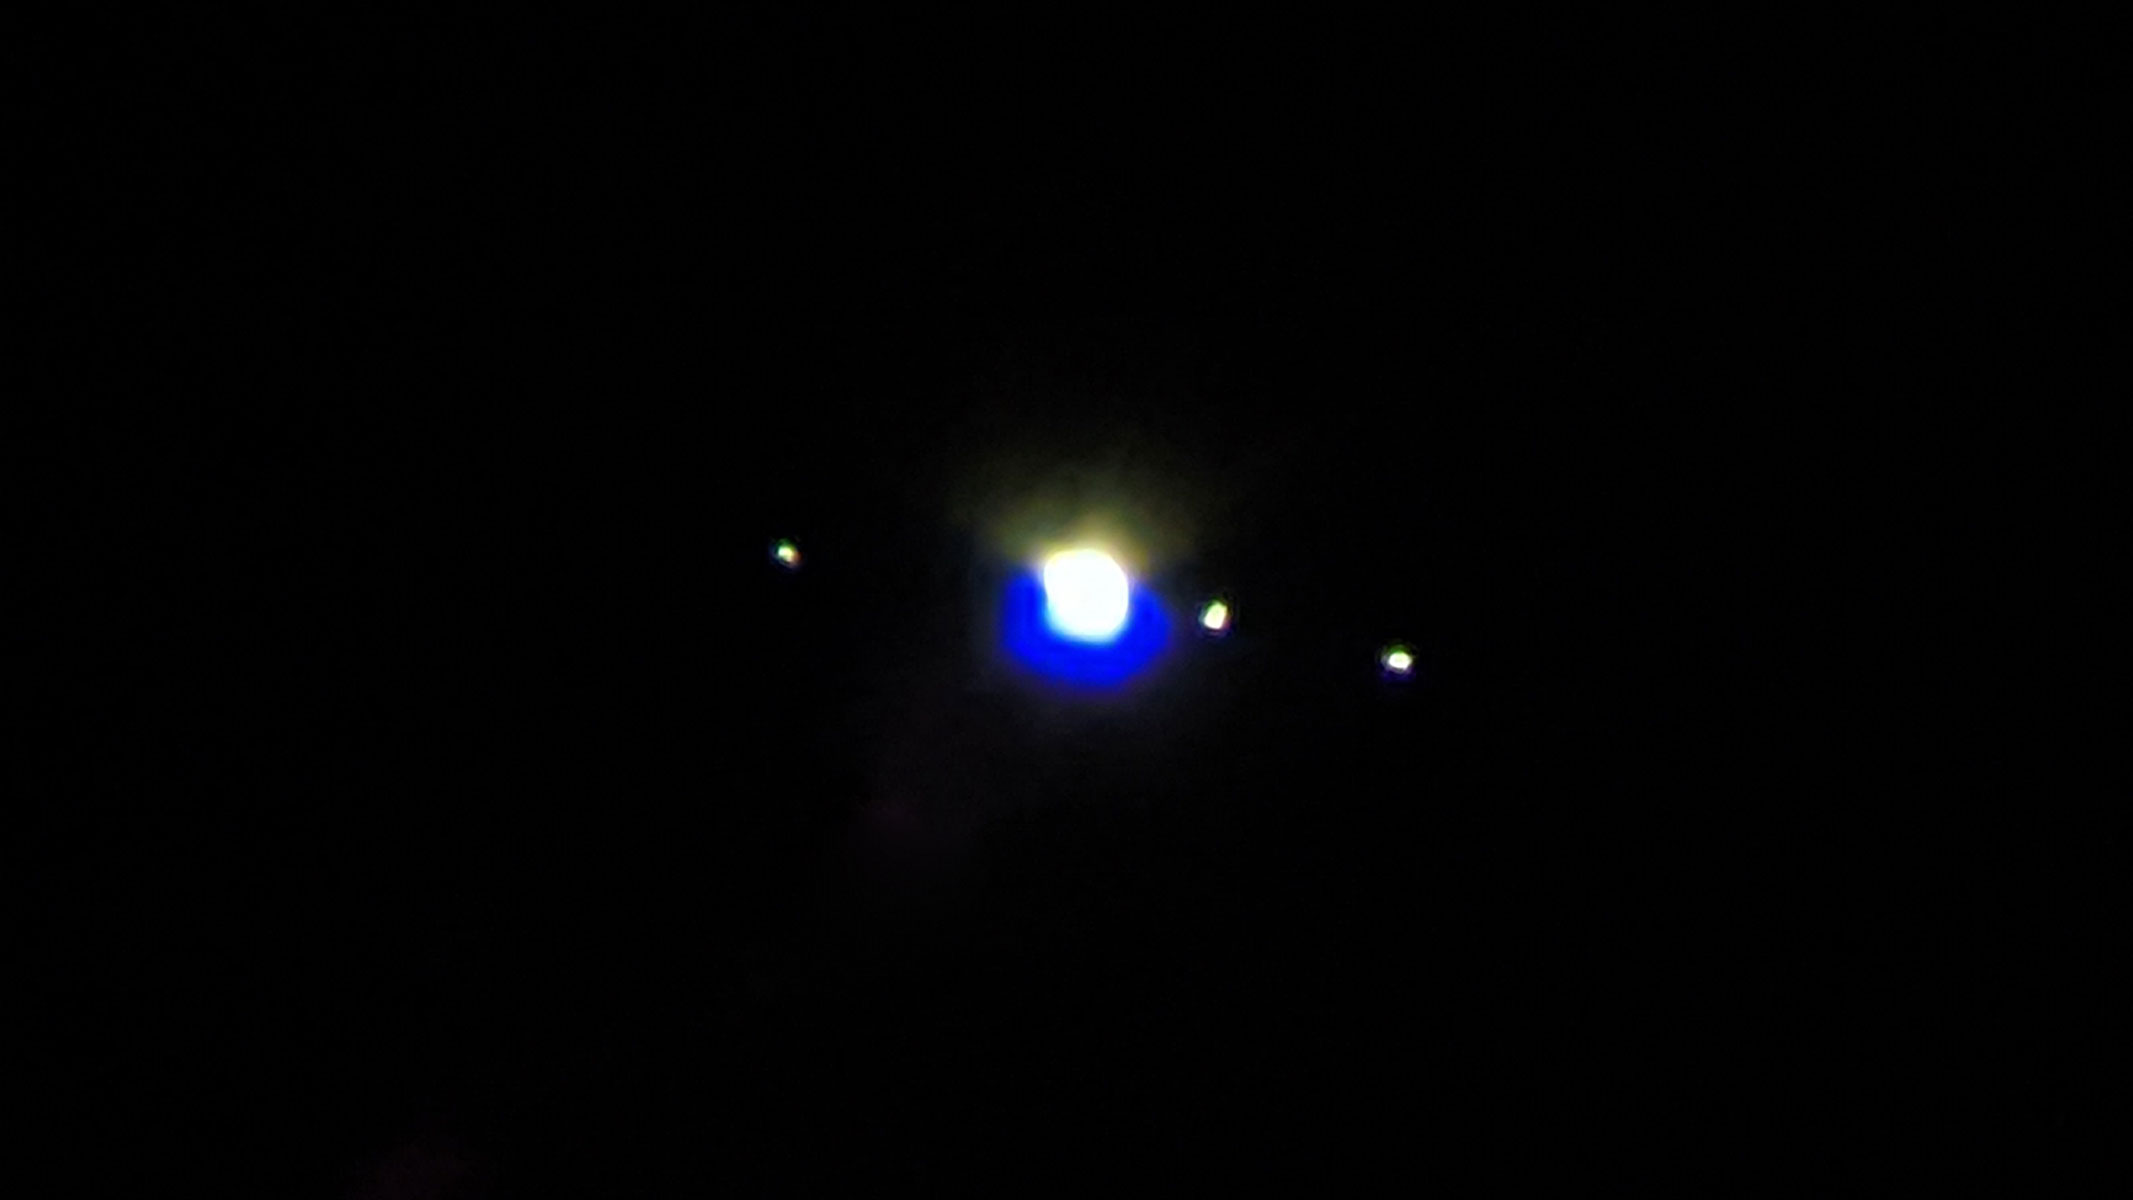 Jupiter and four of its moons as viewed through the binoculars